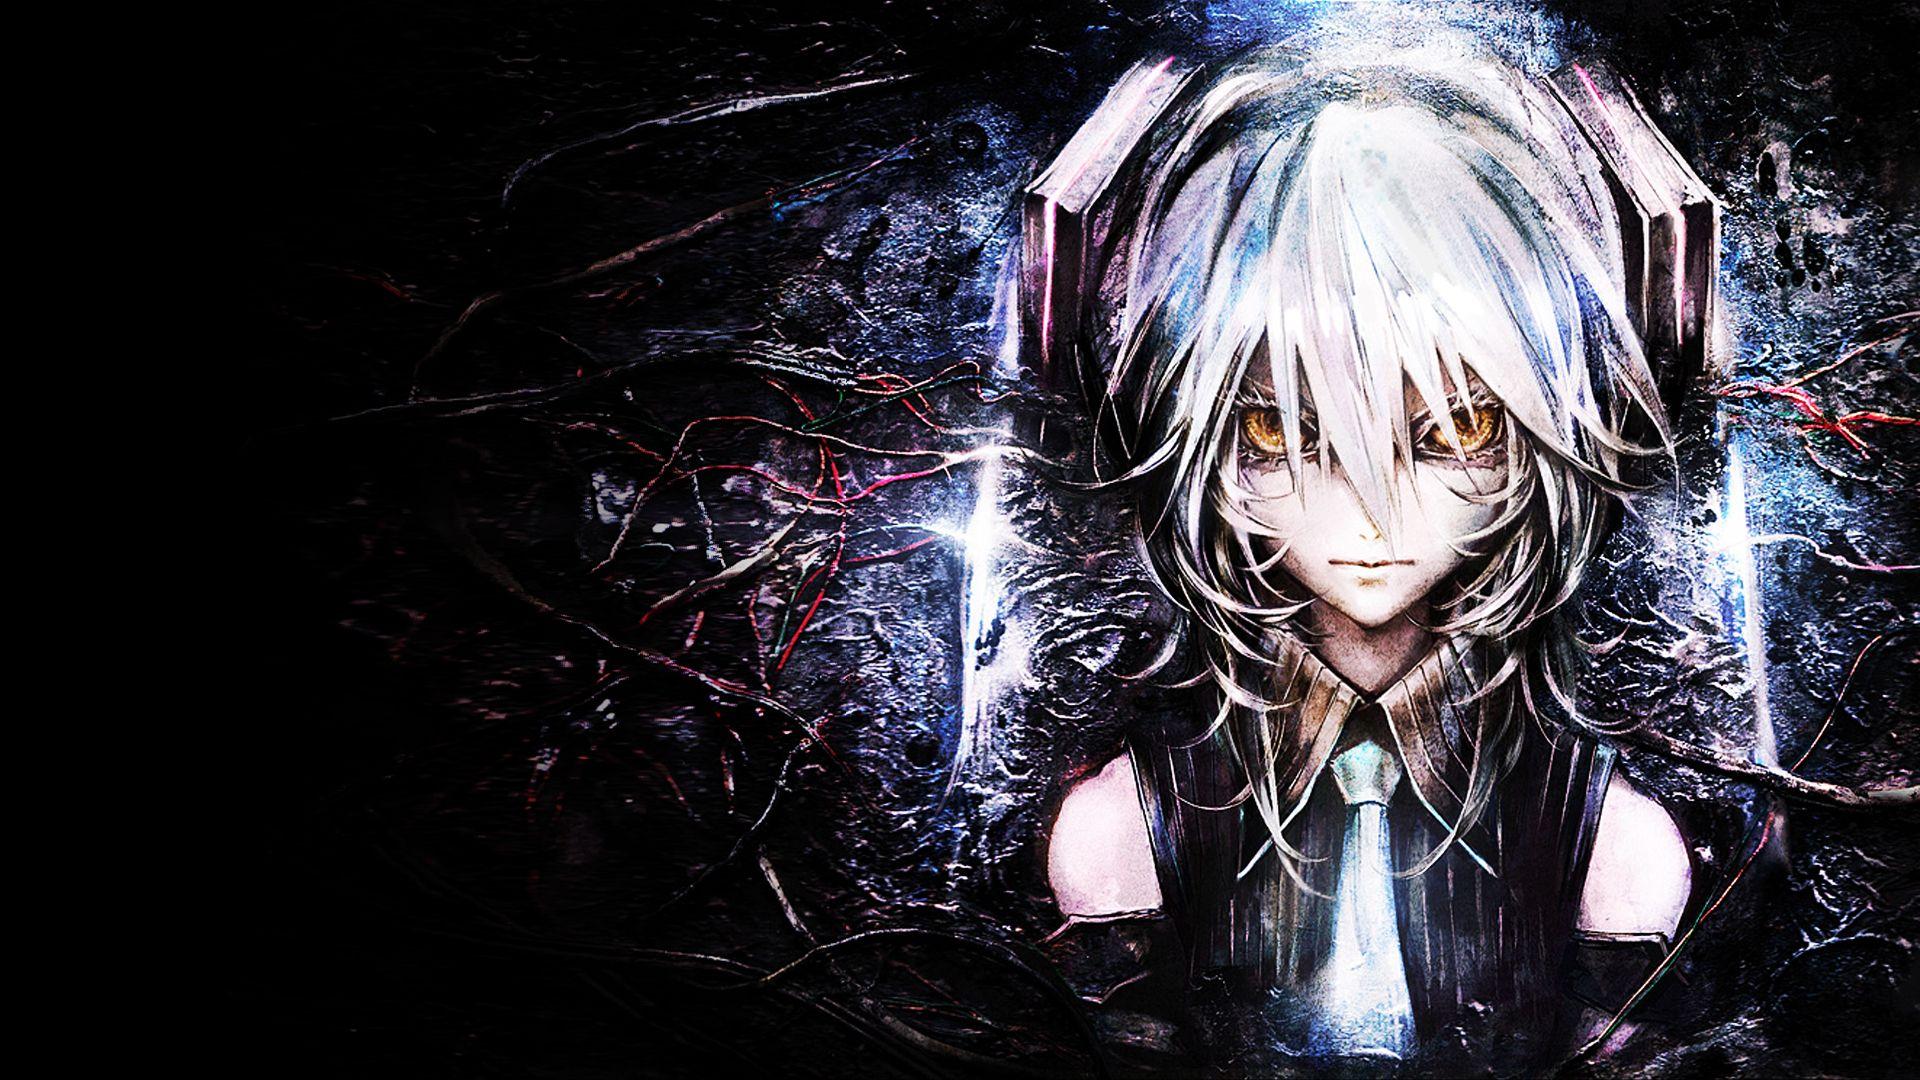 Download Awesome Anime Wallpaper. Best Collections of Top